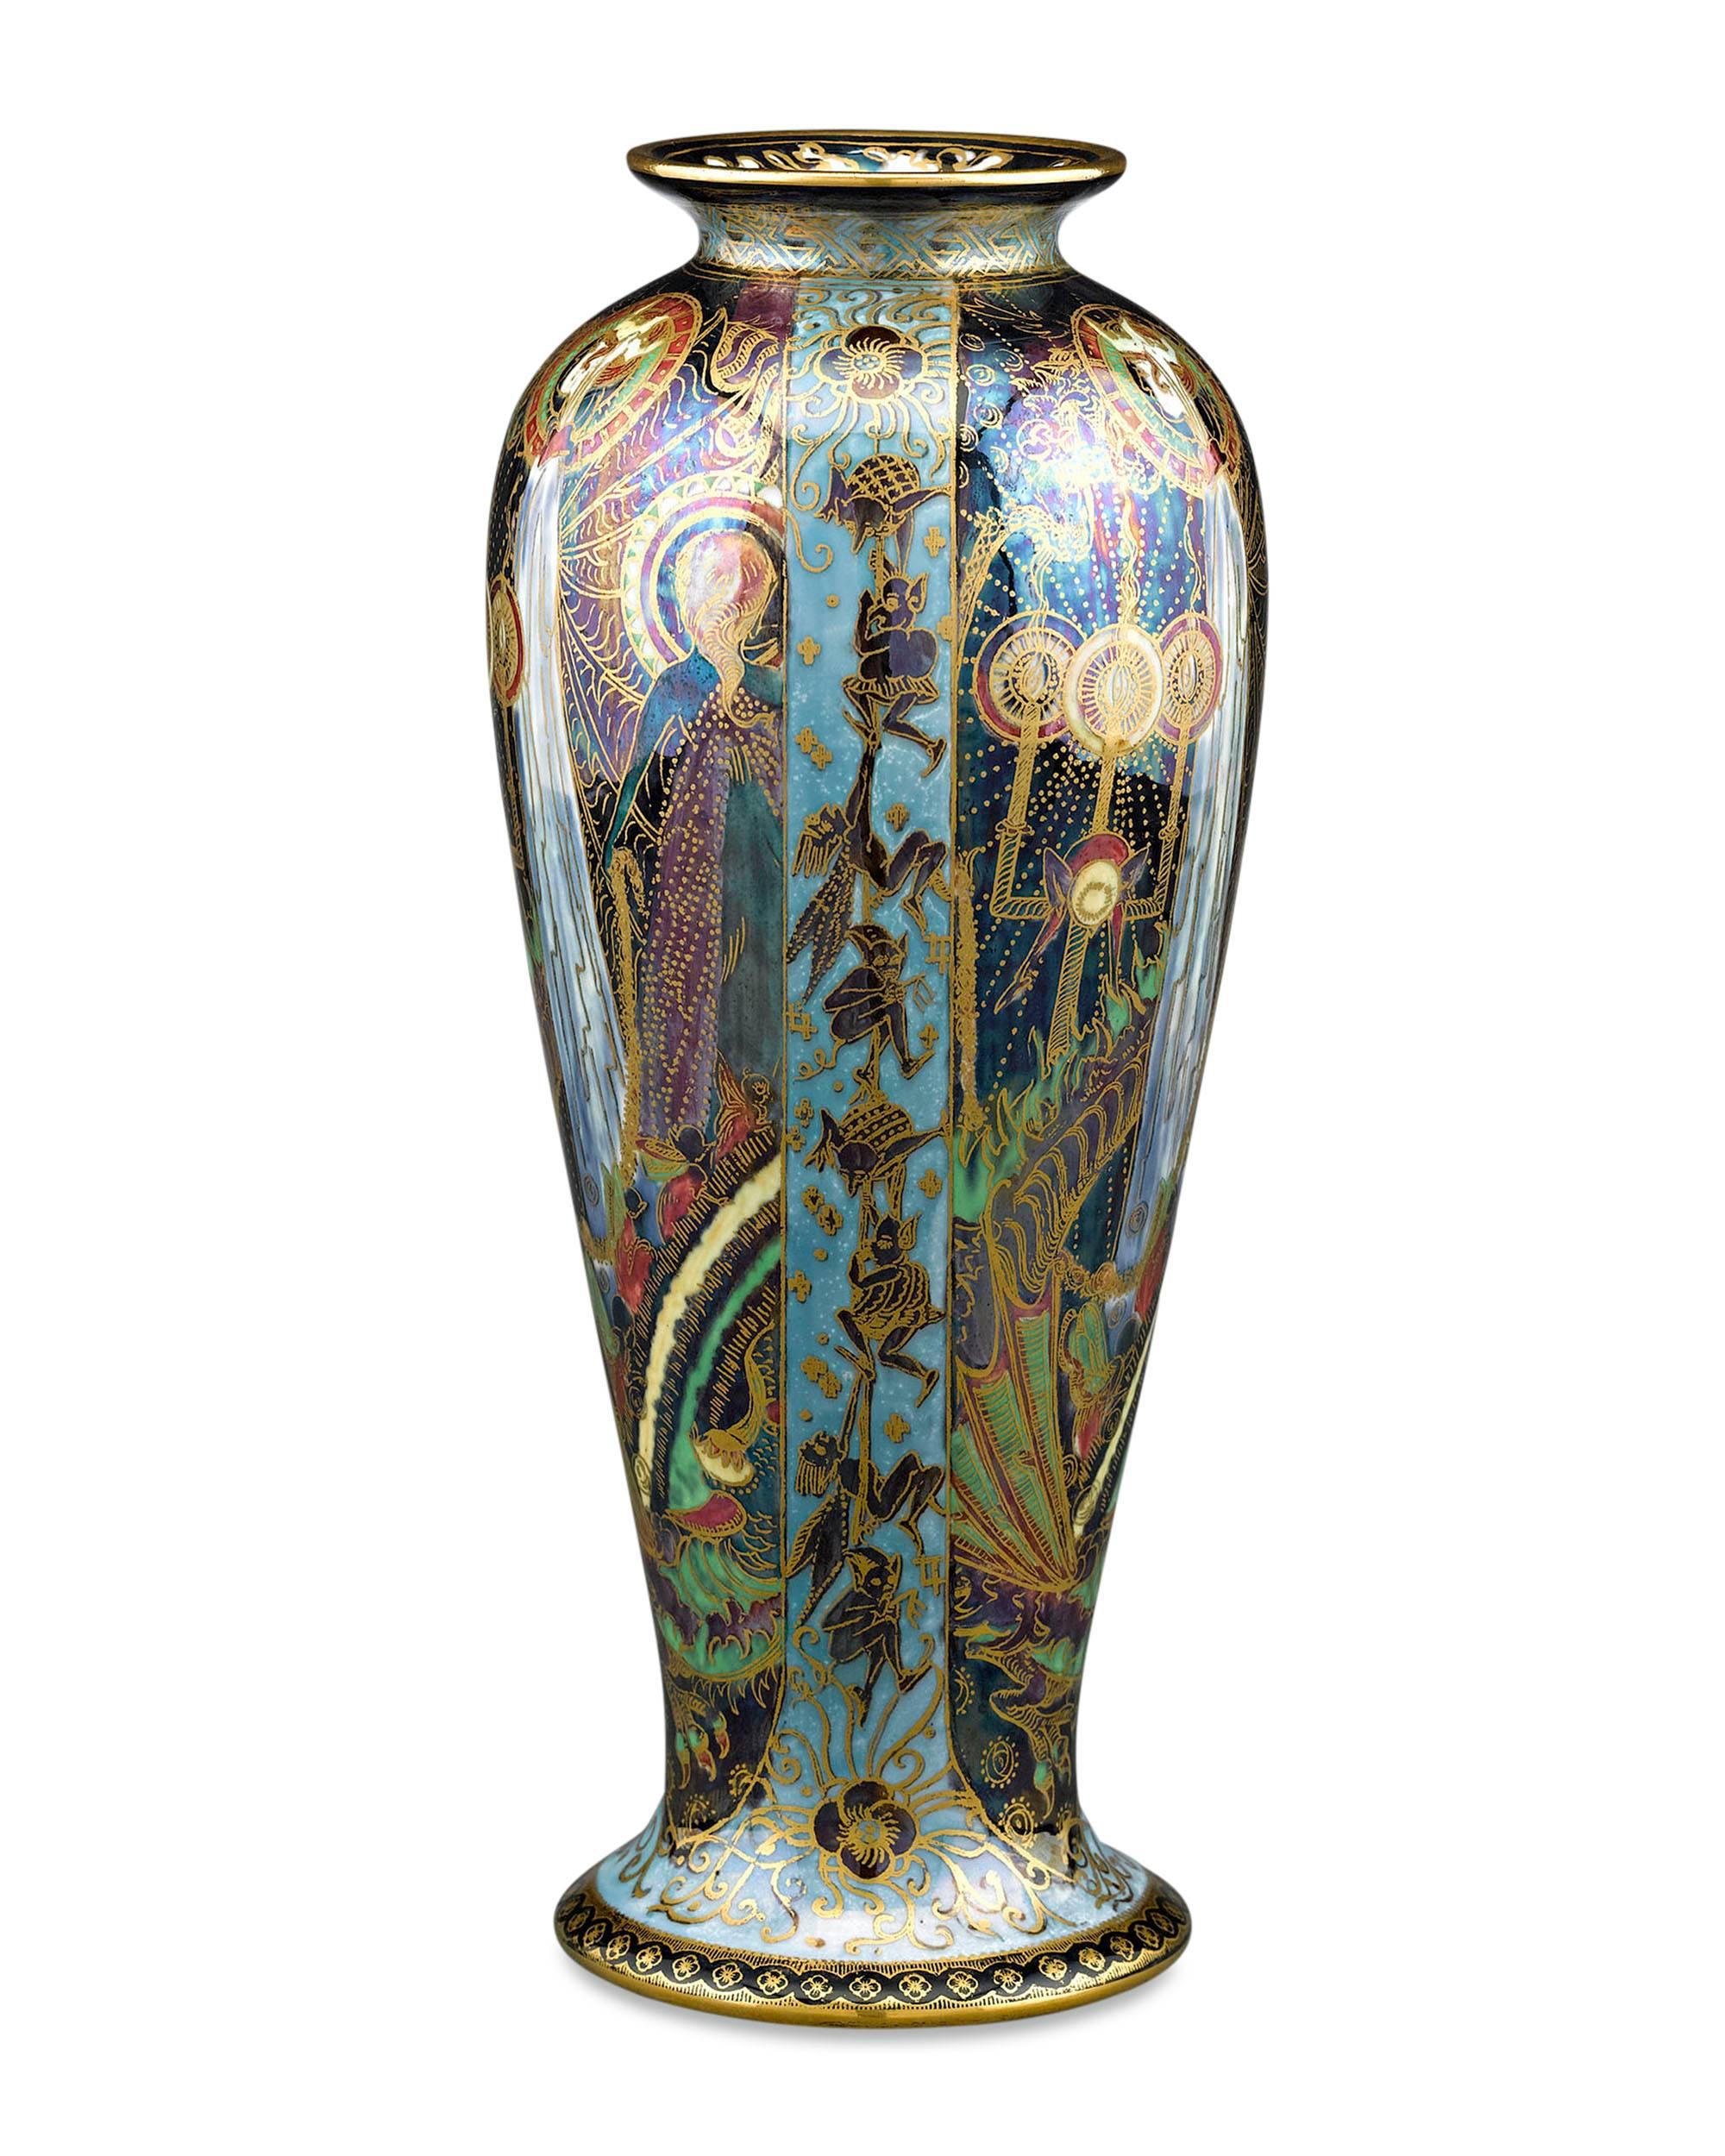 This captivating Fairyland Lustre vase by Wedgwood is crafted in the rare Candlemas pattern by Daisy Makeig-Jones. Though known for her highly imaginative and fanciful patterns, many of Makeig-Jones’ motifs were based on celebrations and folklore